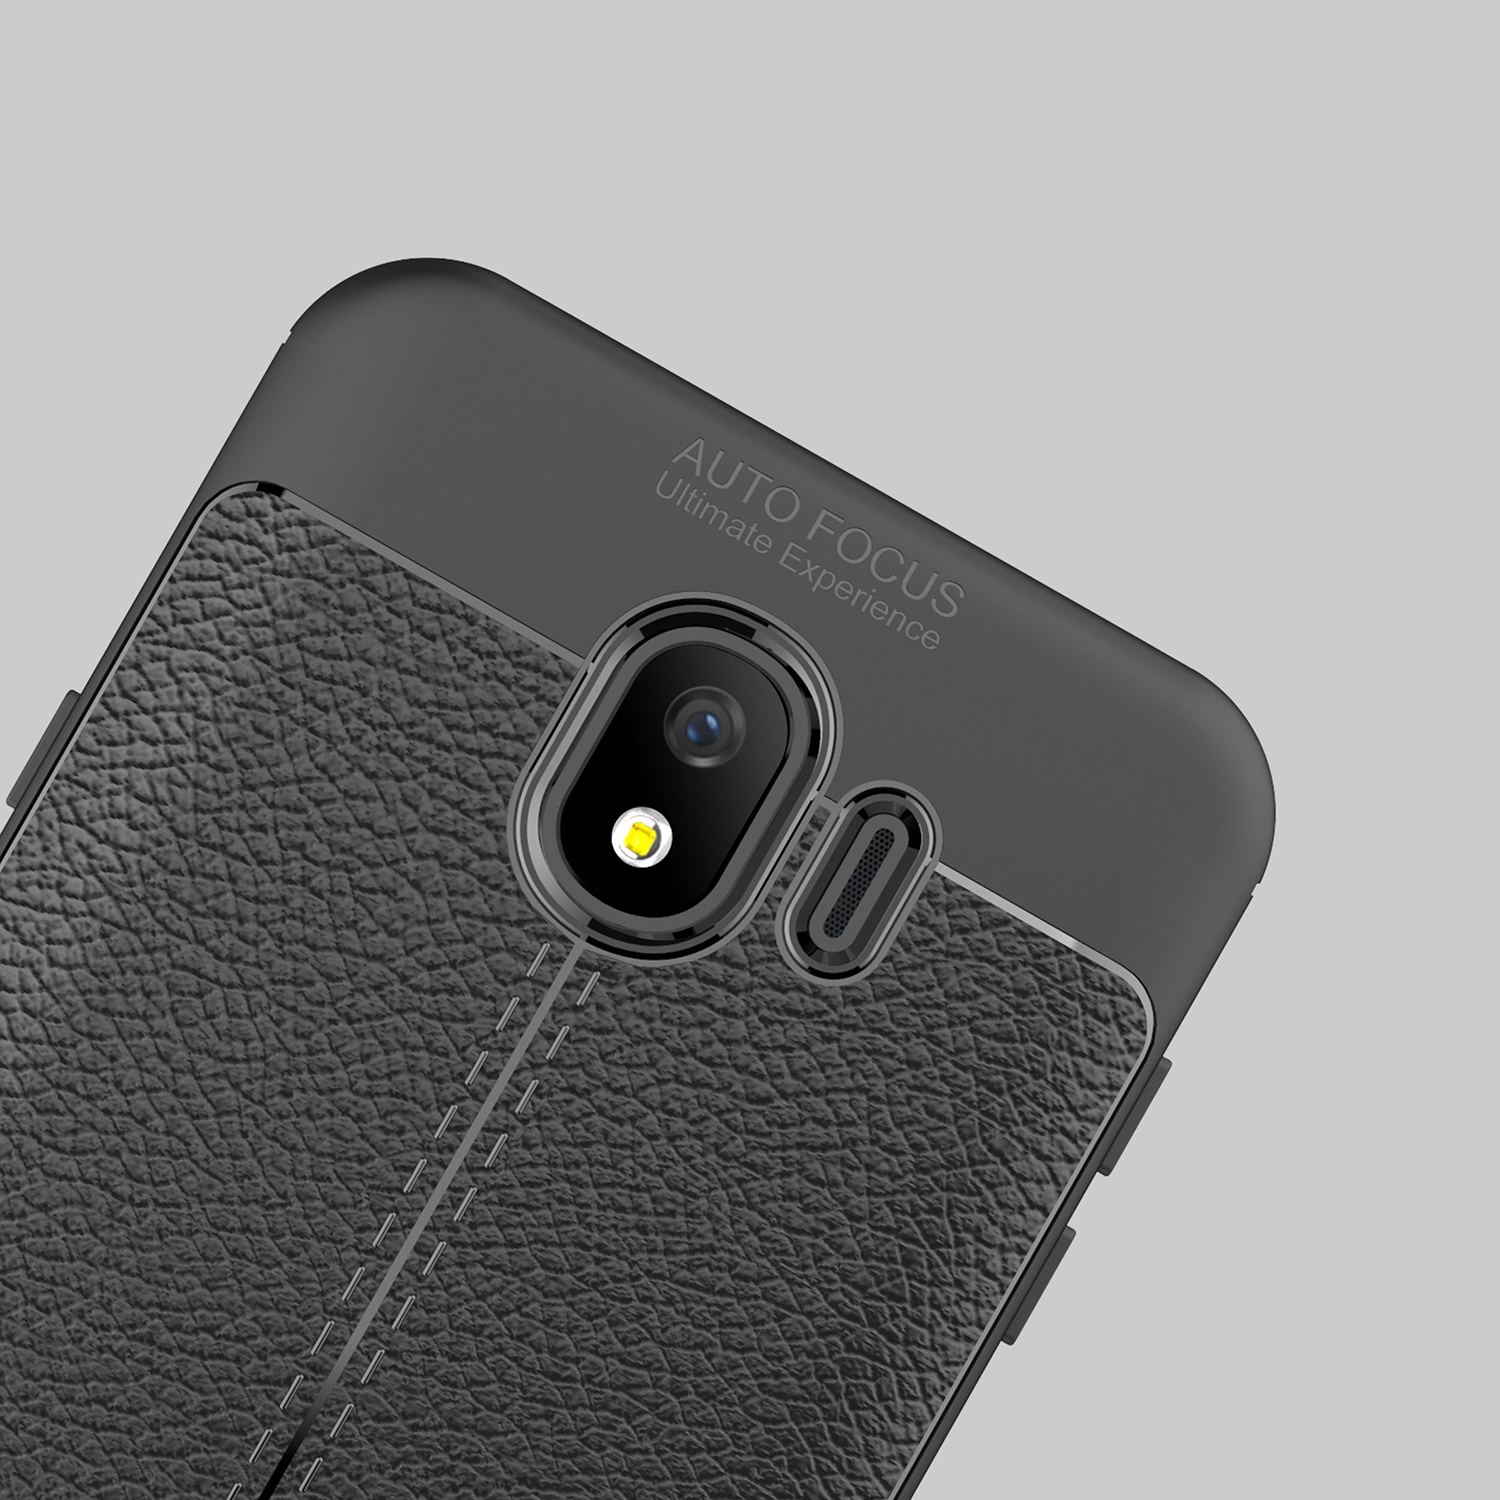 Bakeey-Litchi-Leather-Soft-TPU-Protective-Case-for-Samsung-Galaxy-J4-2018-EU-Version-1312875-6